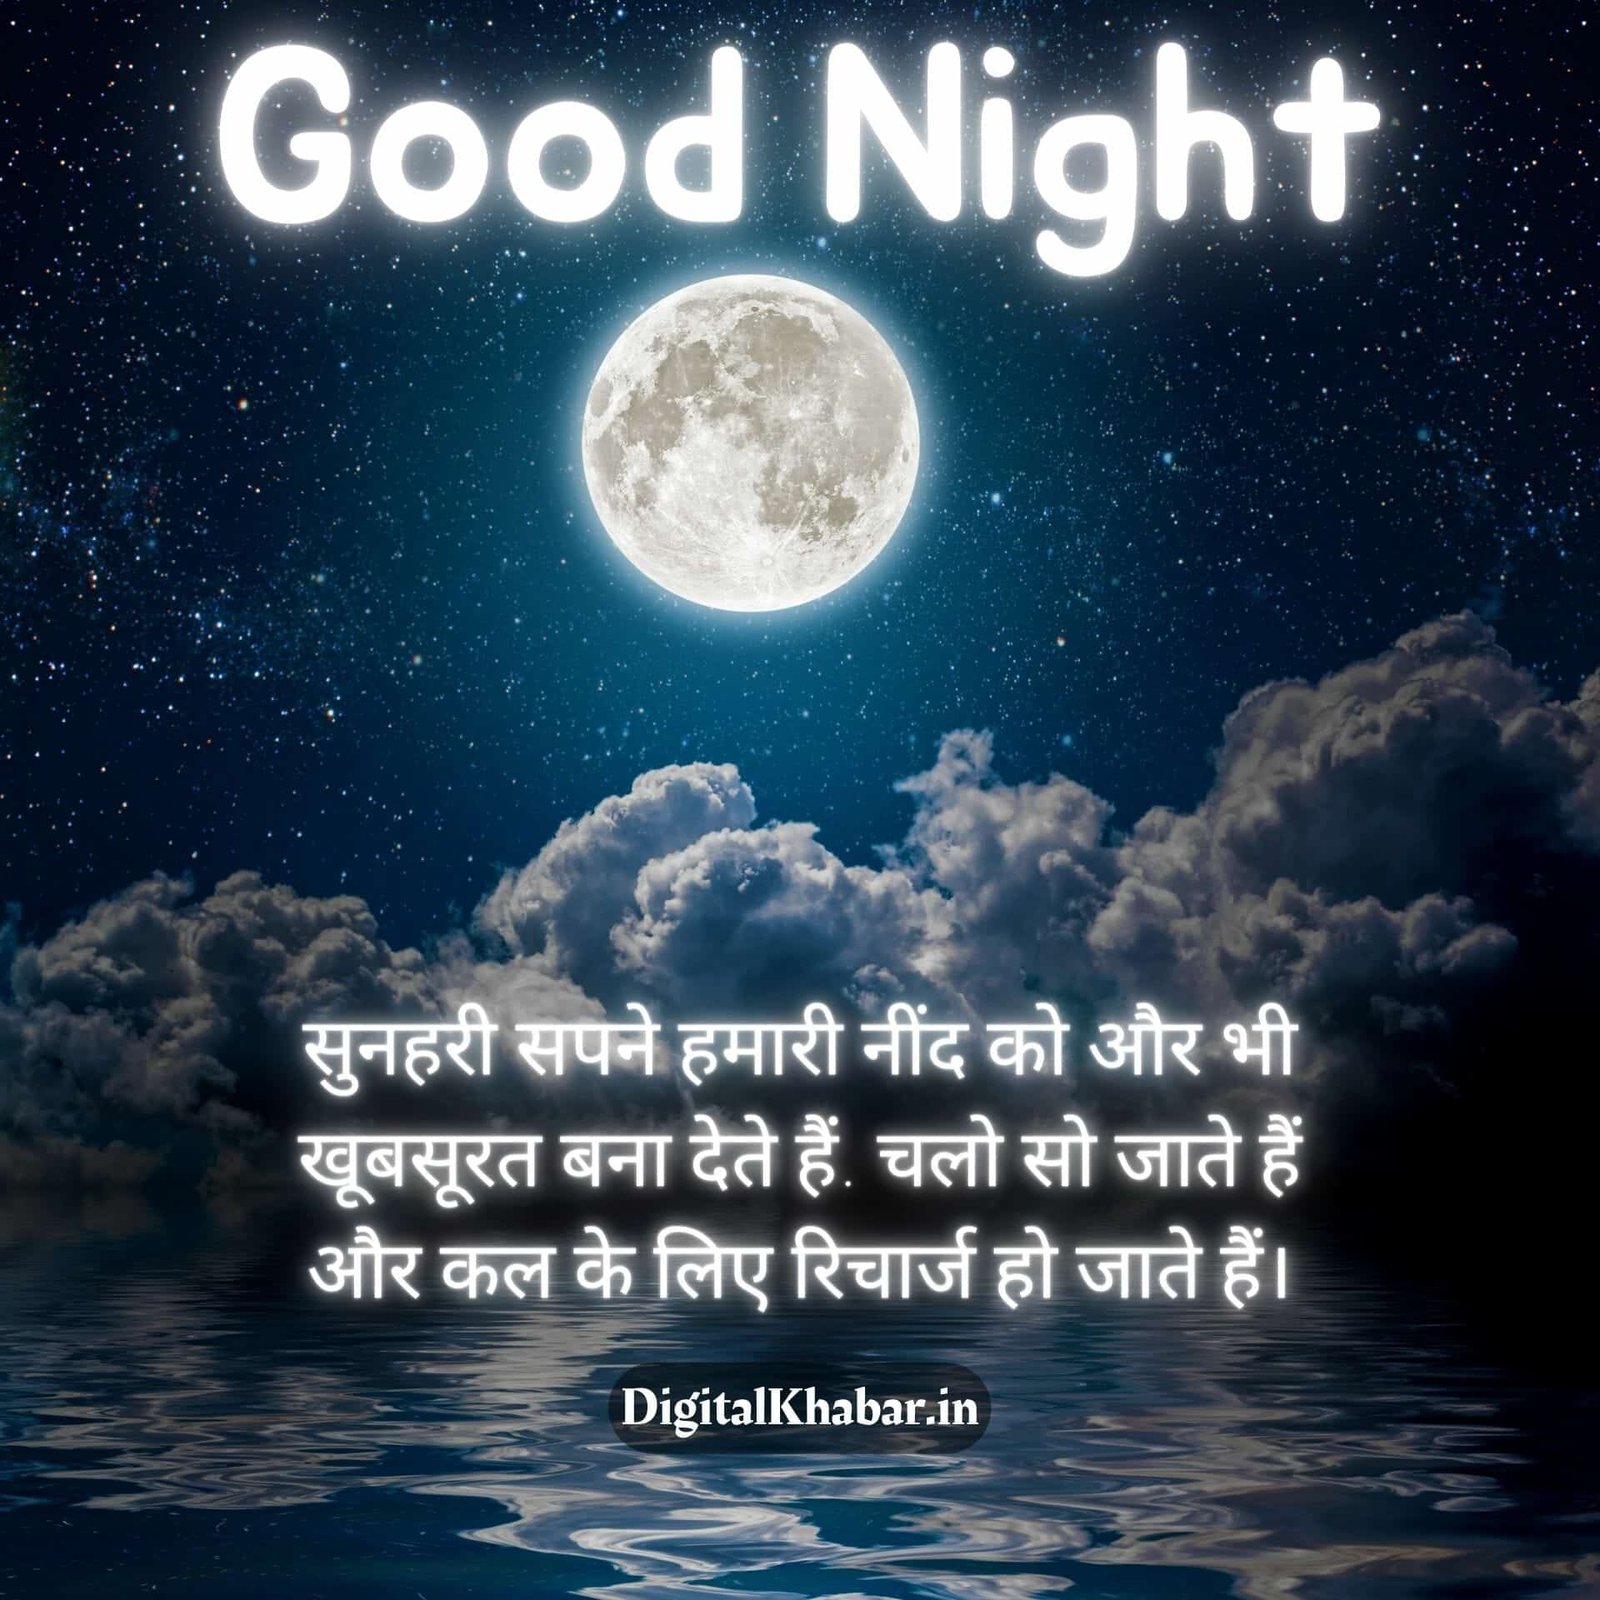 Good Night Messages for friends